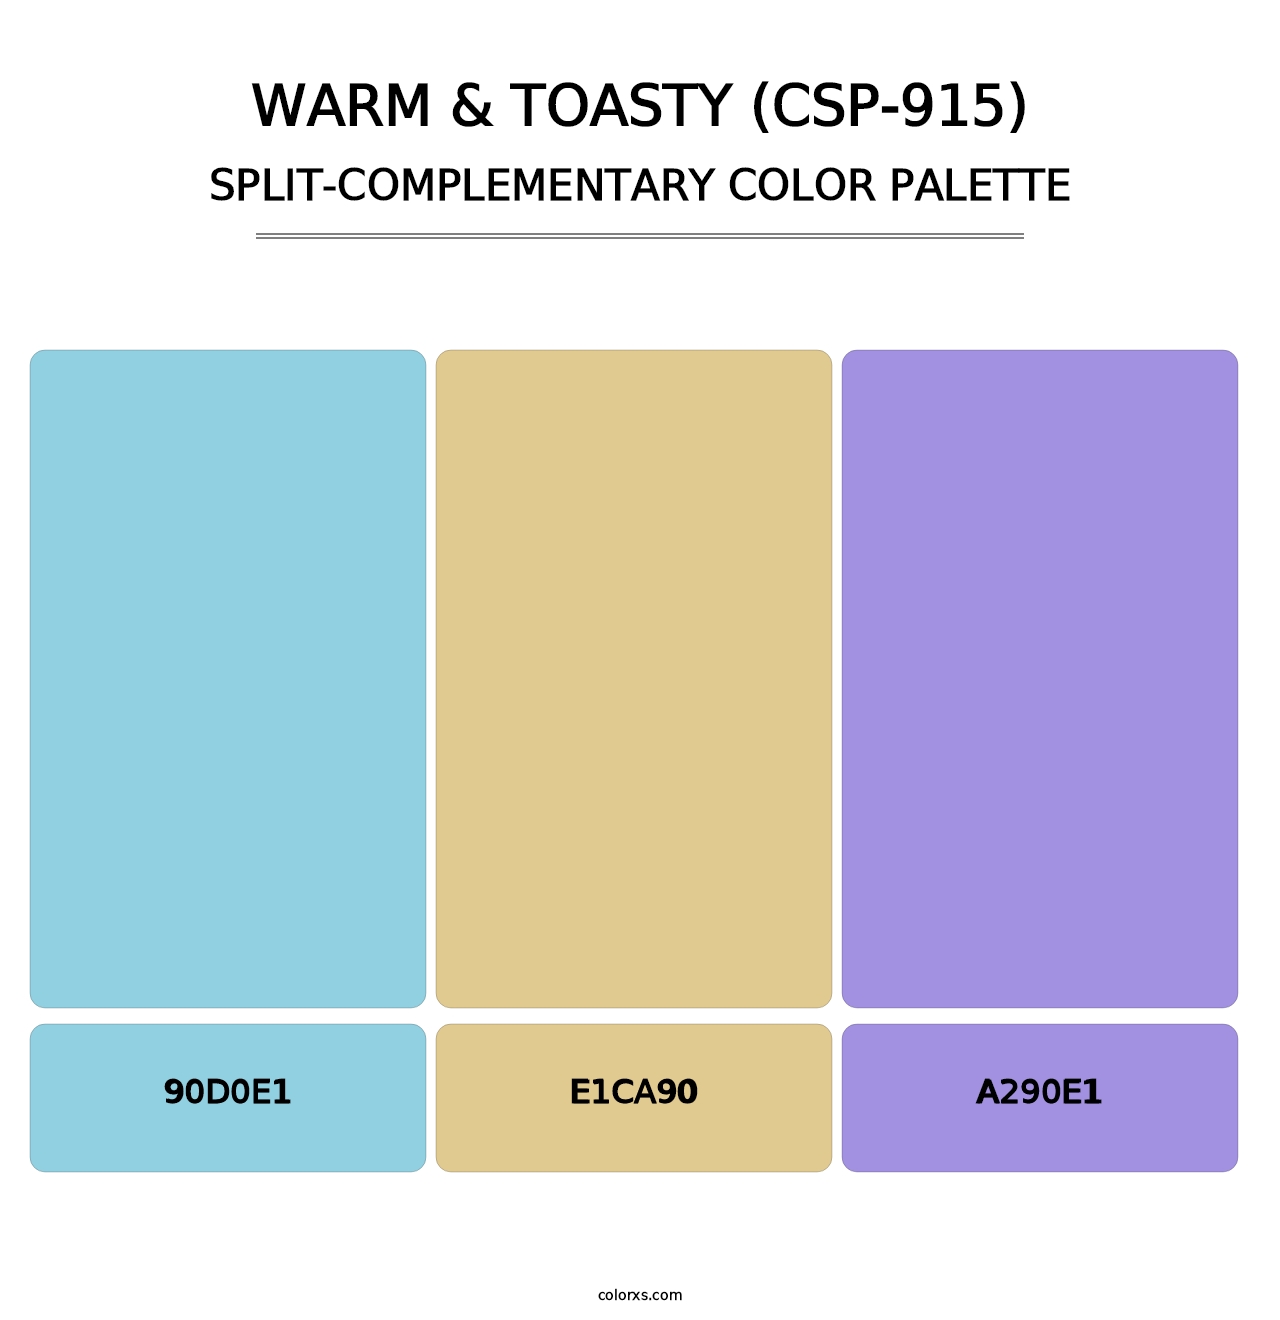 Warm & Toasty (CSP-915) - Split-Complementary Color Palette